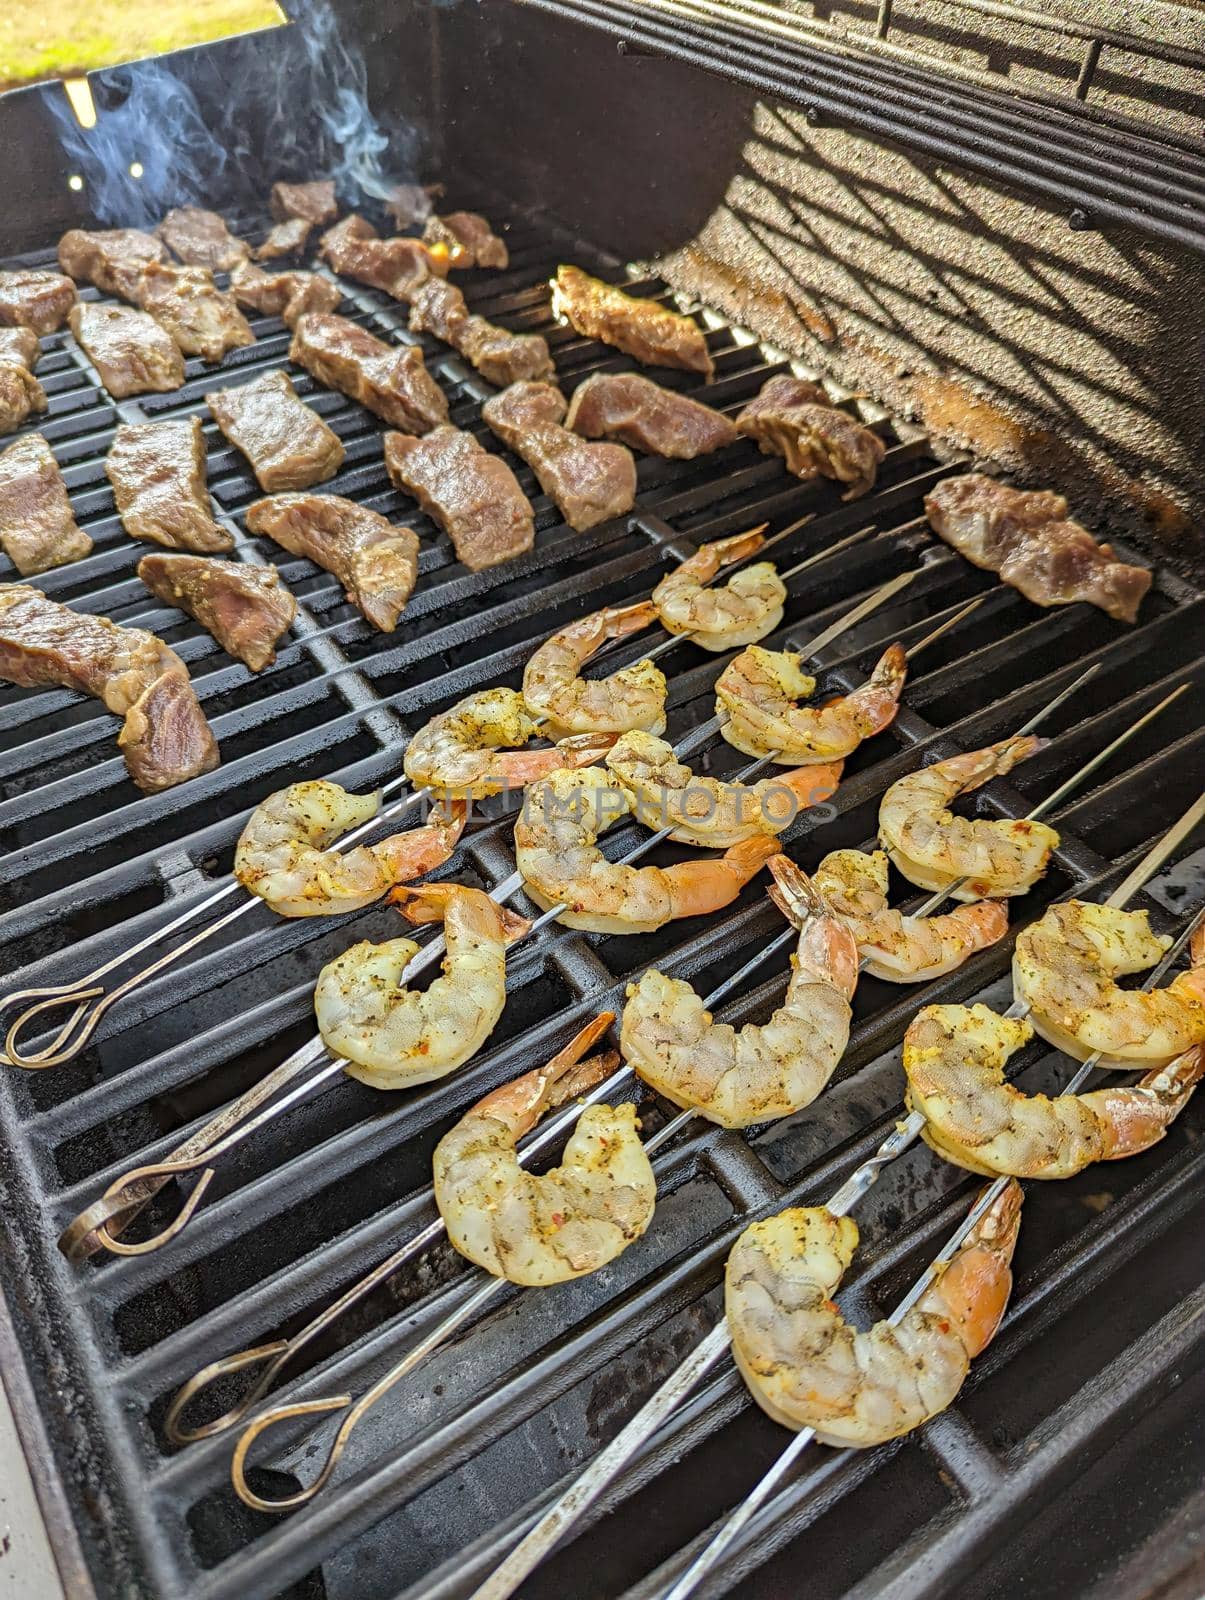 Jumbo Shrimp and Steak on a Grill by digidreamgrafix